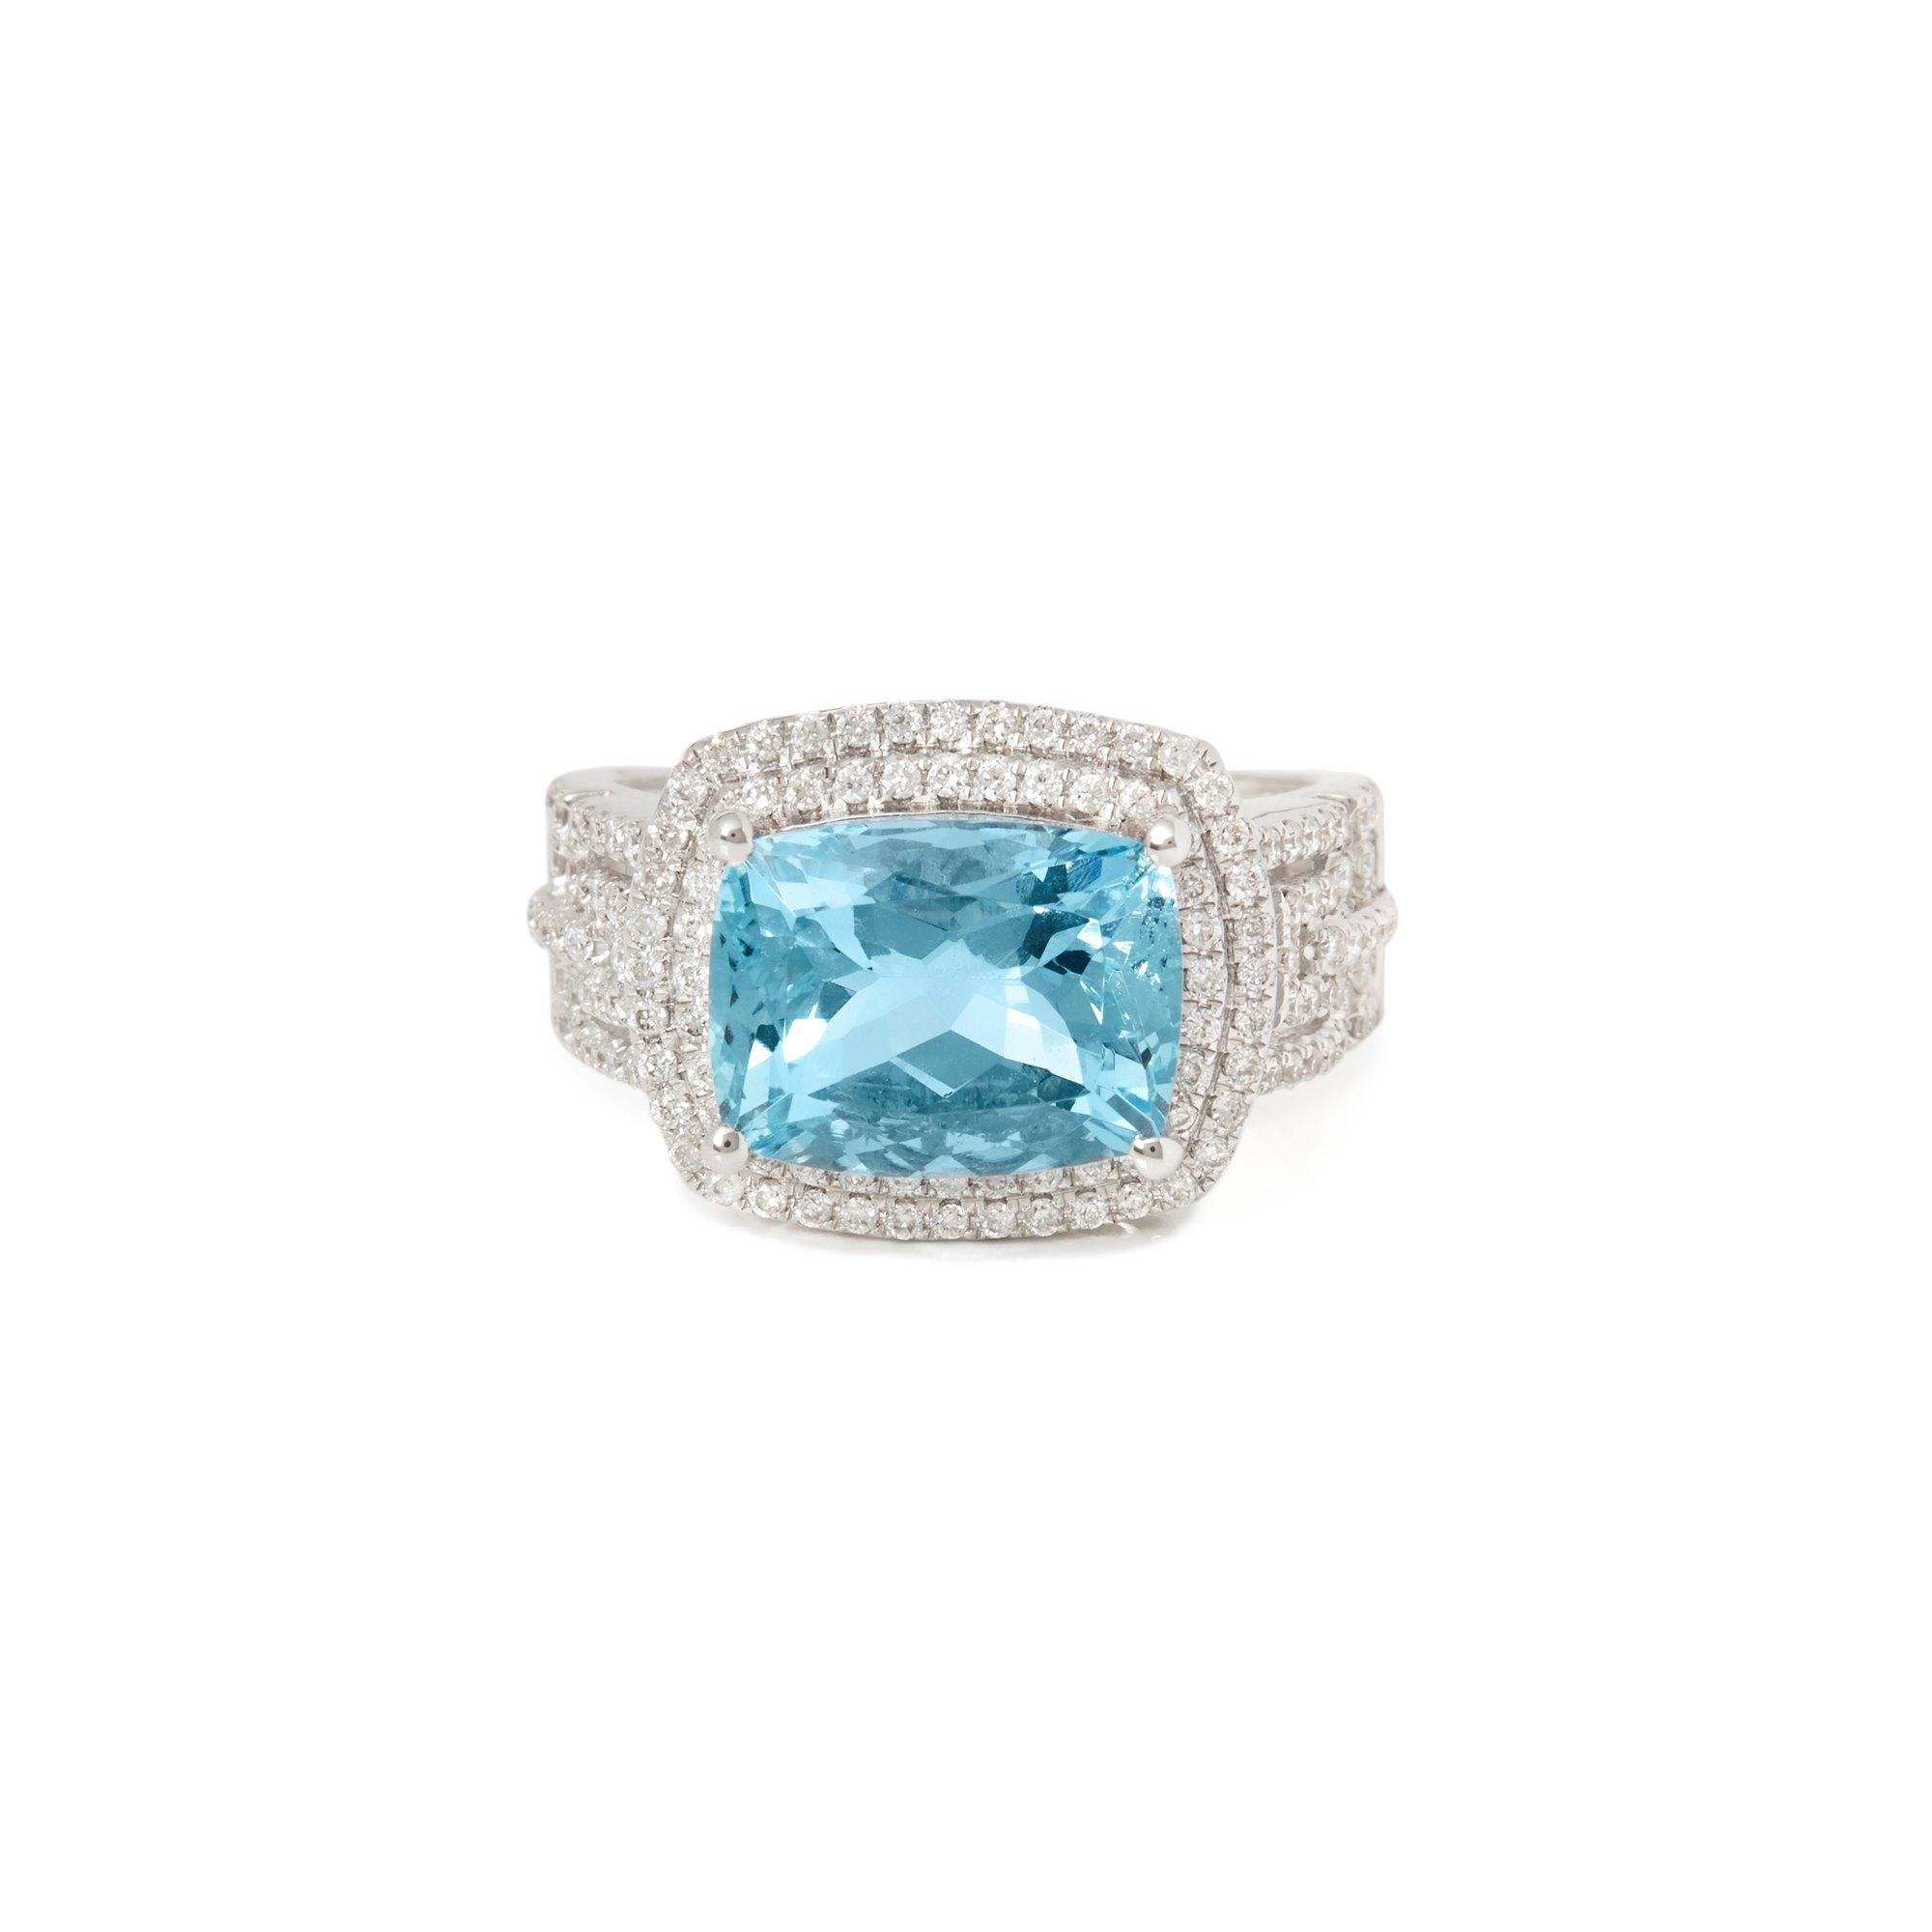 This ring designed by David Jerome is from his private collection and features one cushion cut Aquamarine totalling 4.81cts sourced in Brazil. Set with round brilliant cut Diamonds totalling 0.55cts mounted in an 18k white gold setting. Finger size